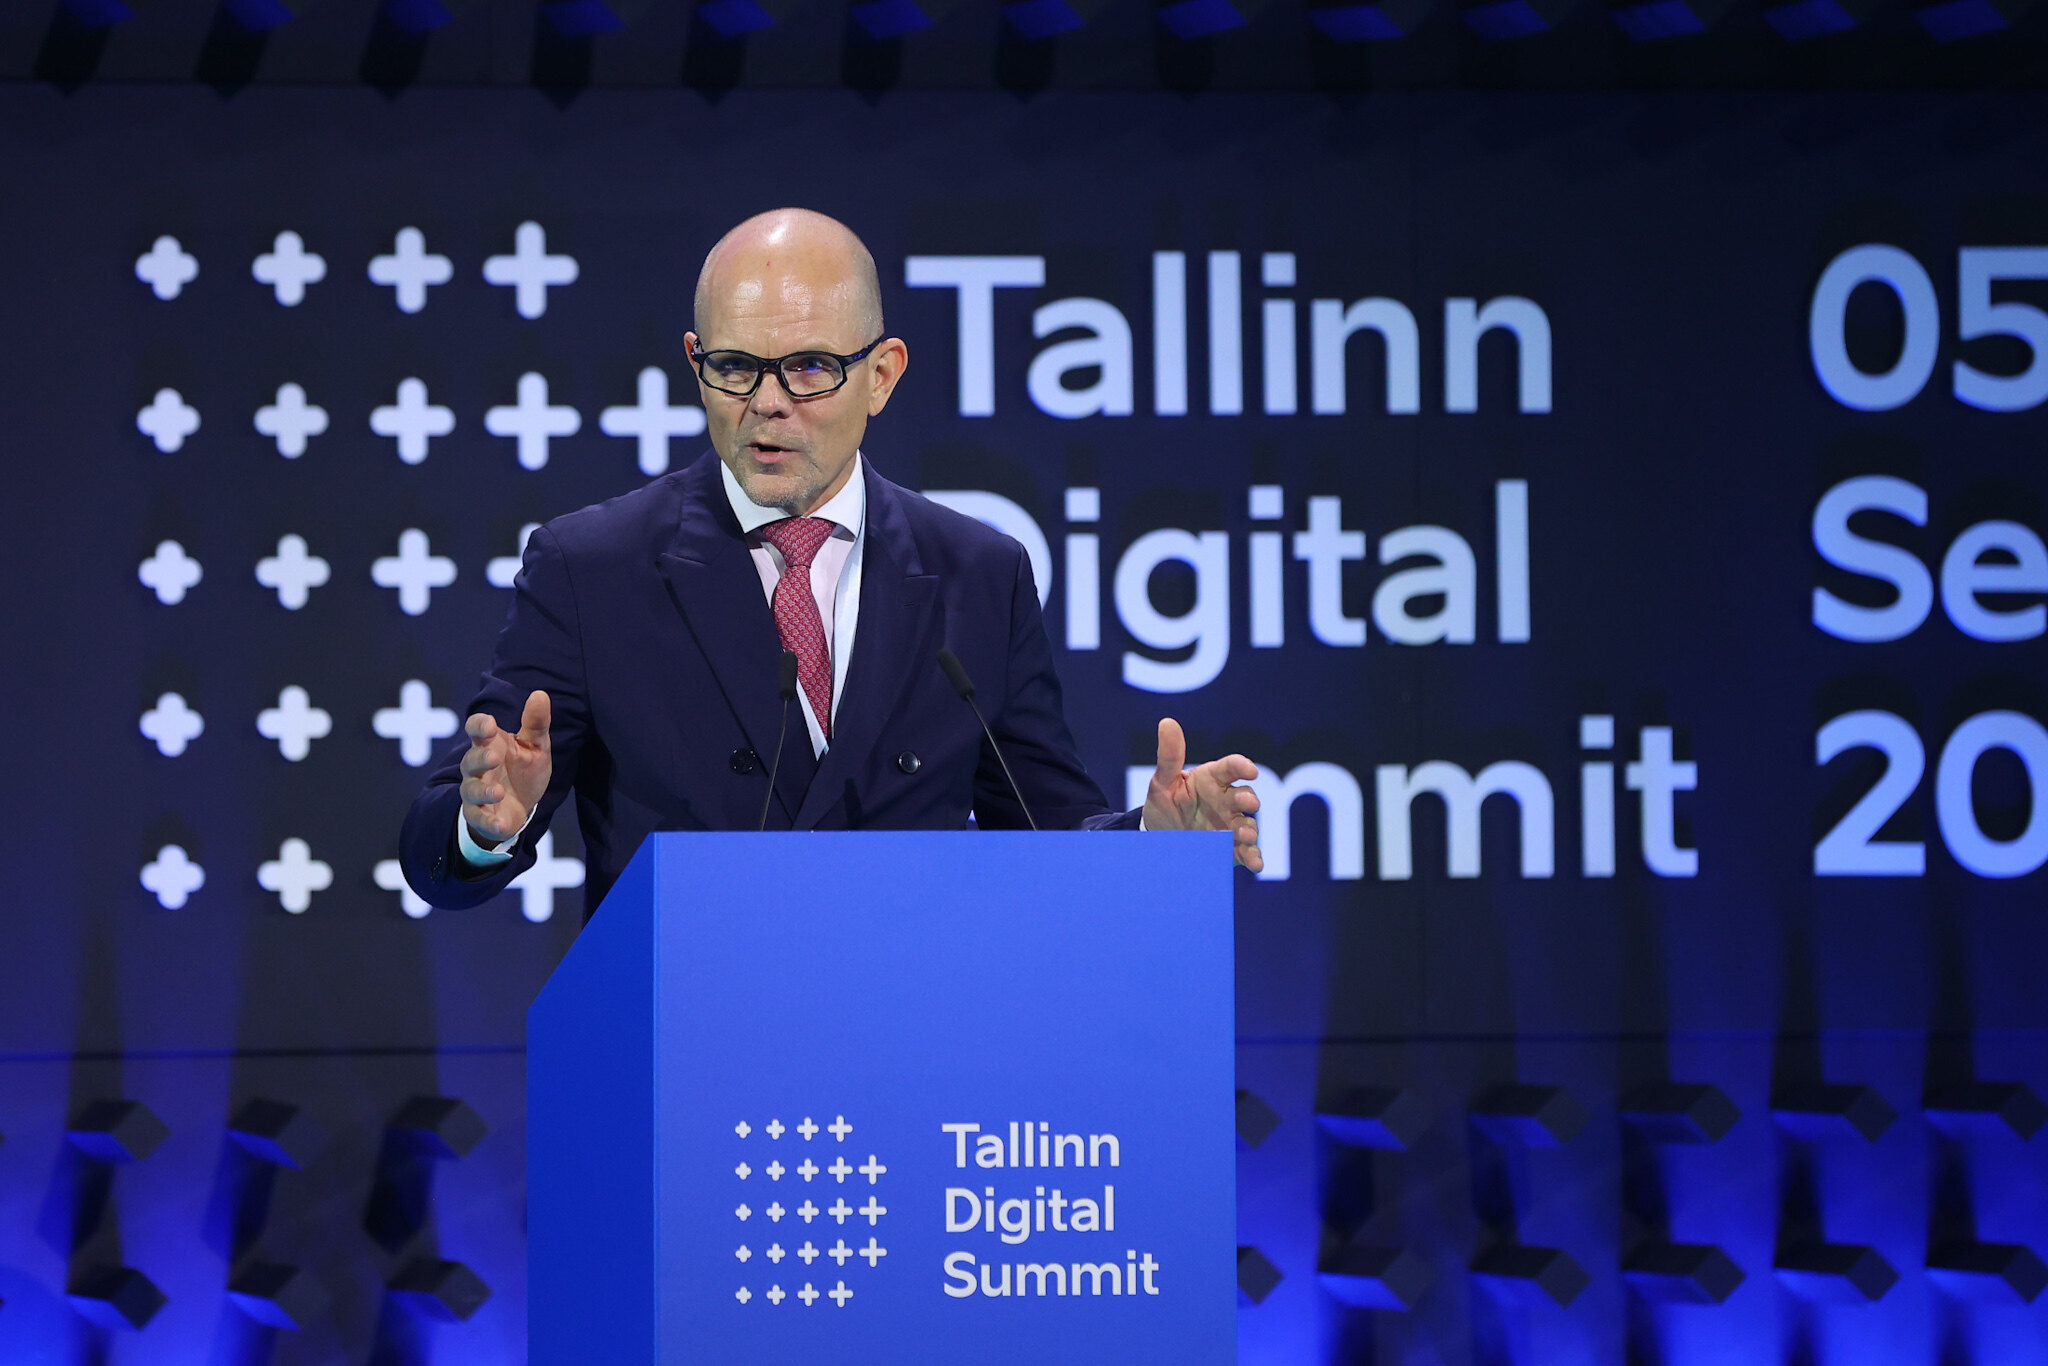 Artificial intelligence is part of the next chapter in Estonia’s digital story